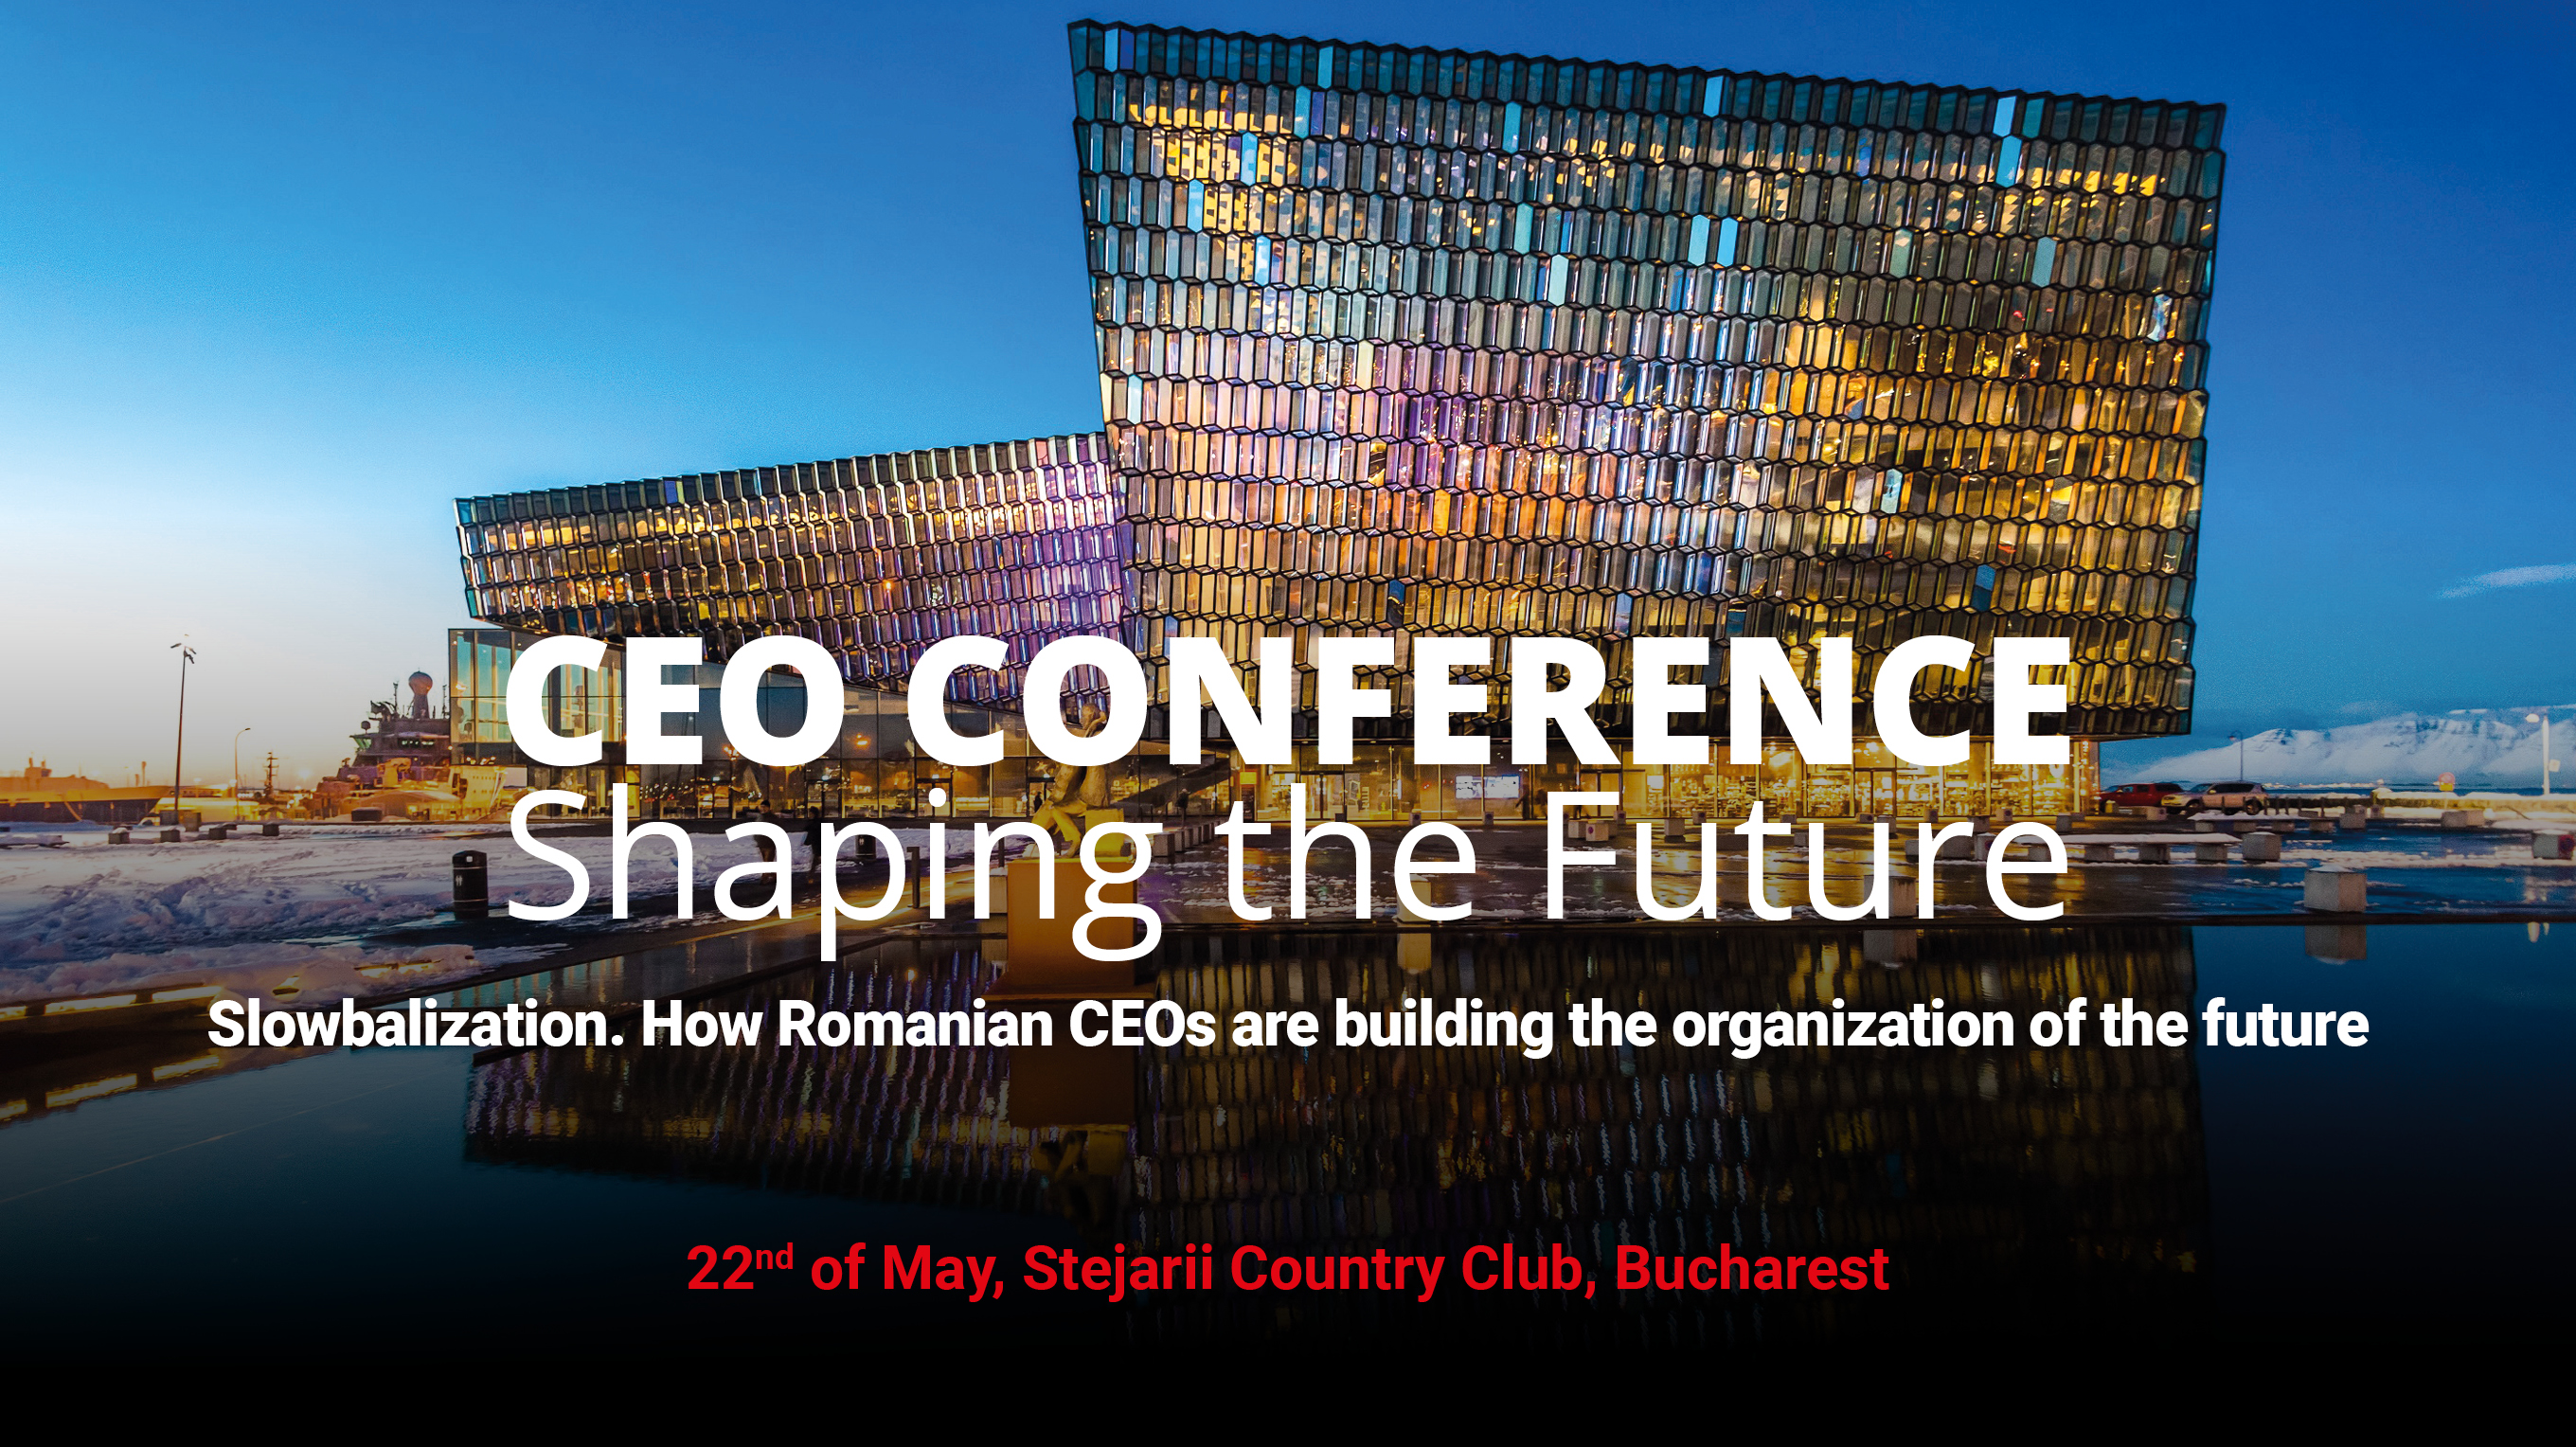 CEO Conference – Shaping the Future Slowbalization – How to redesign the organization of the future